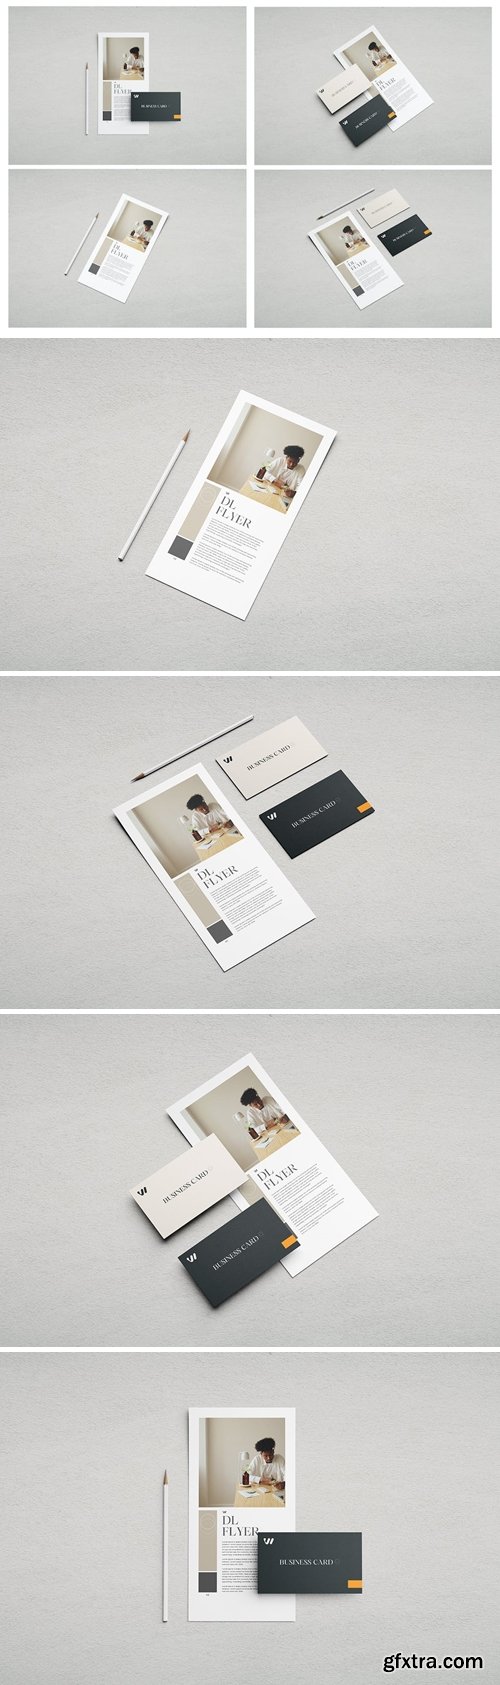 Dl Flyer With Business Card Mockup 7QNBH32